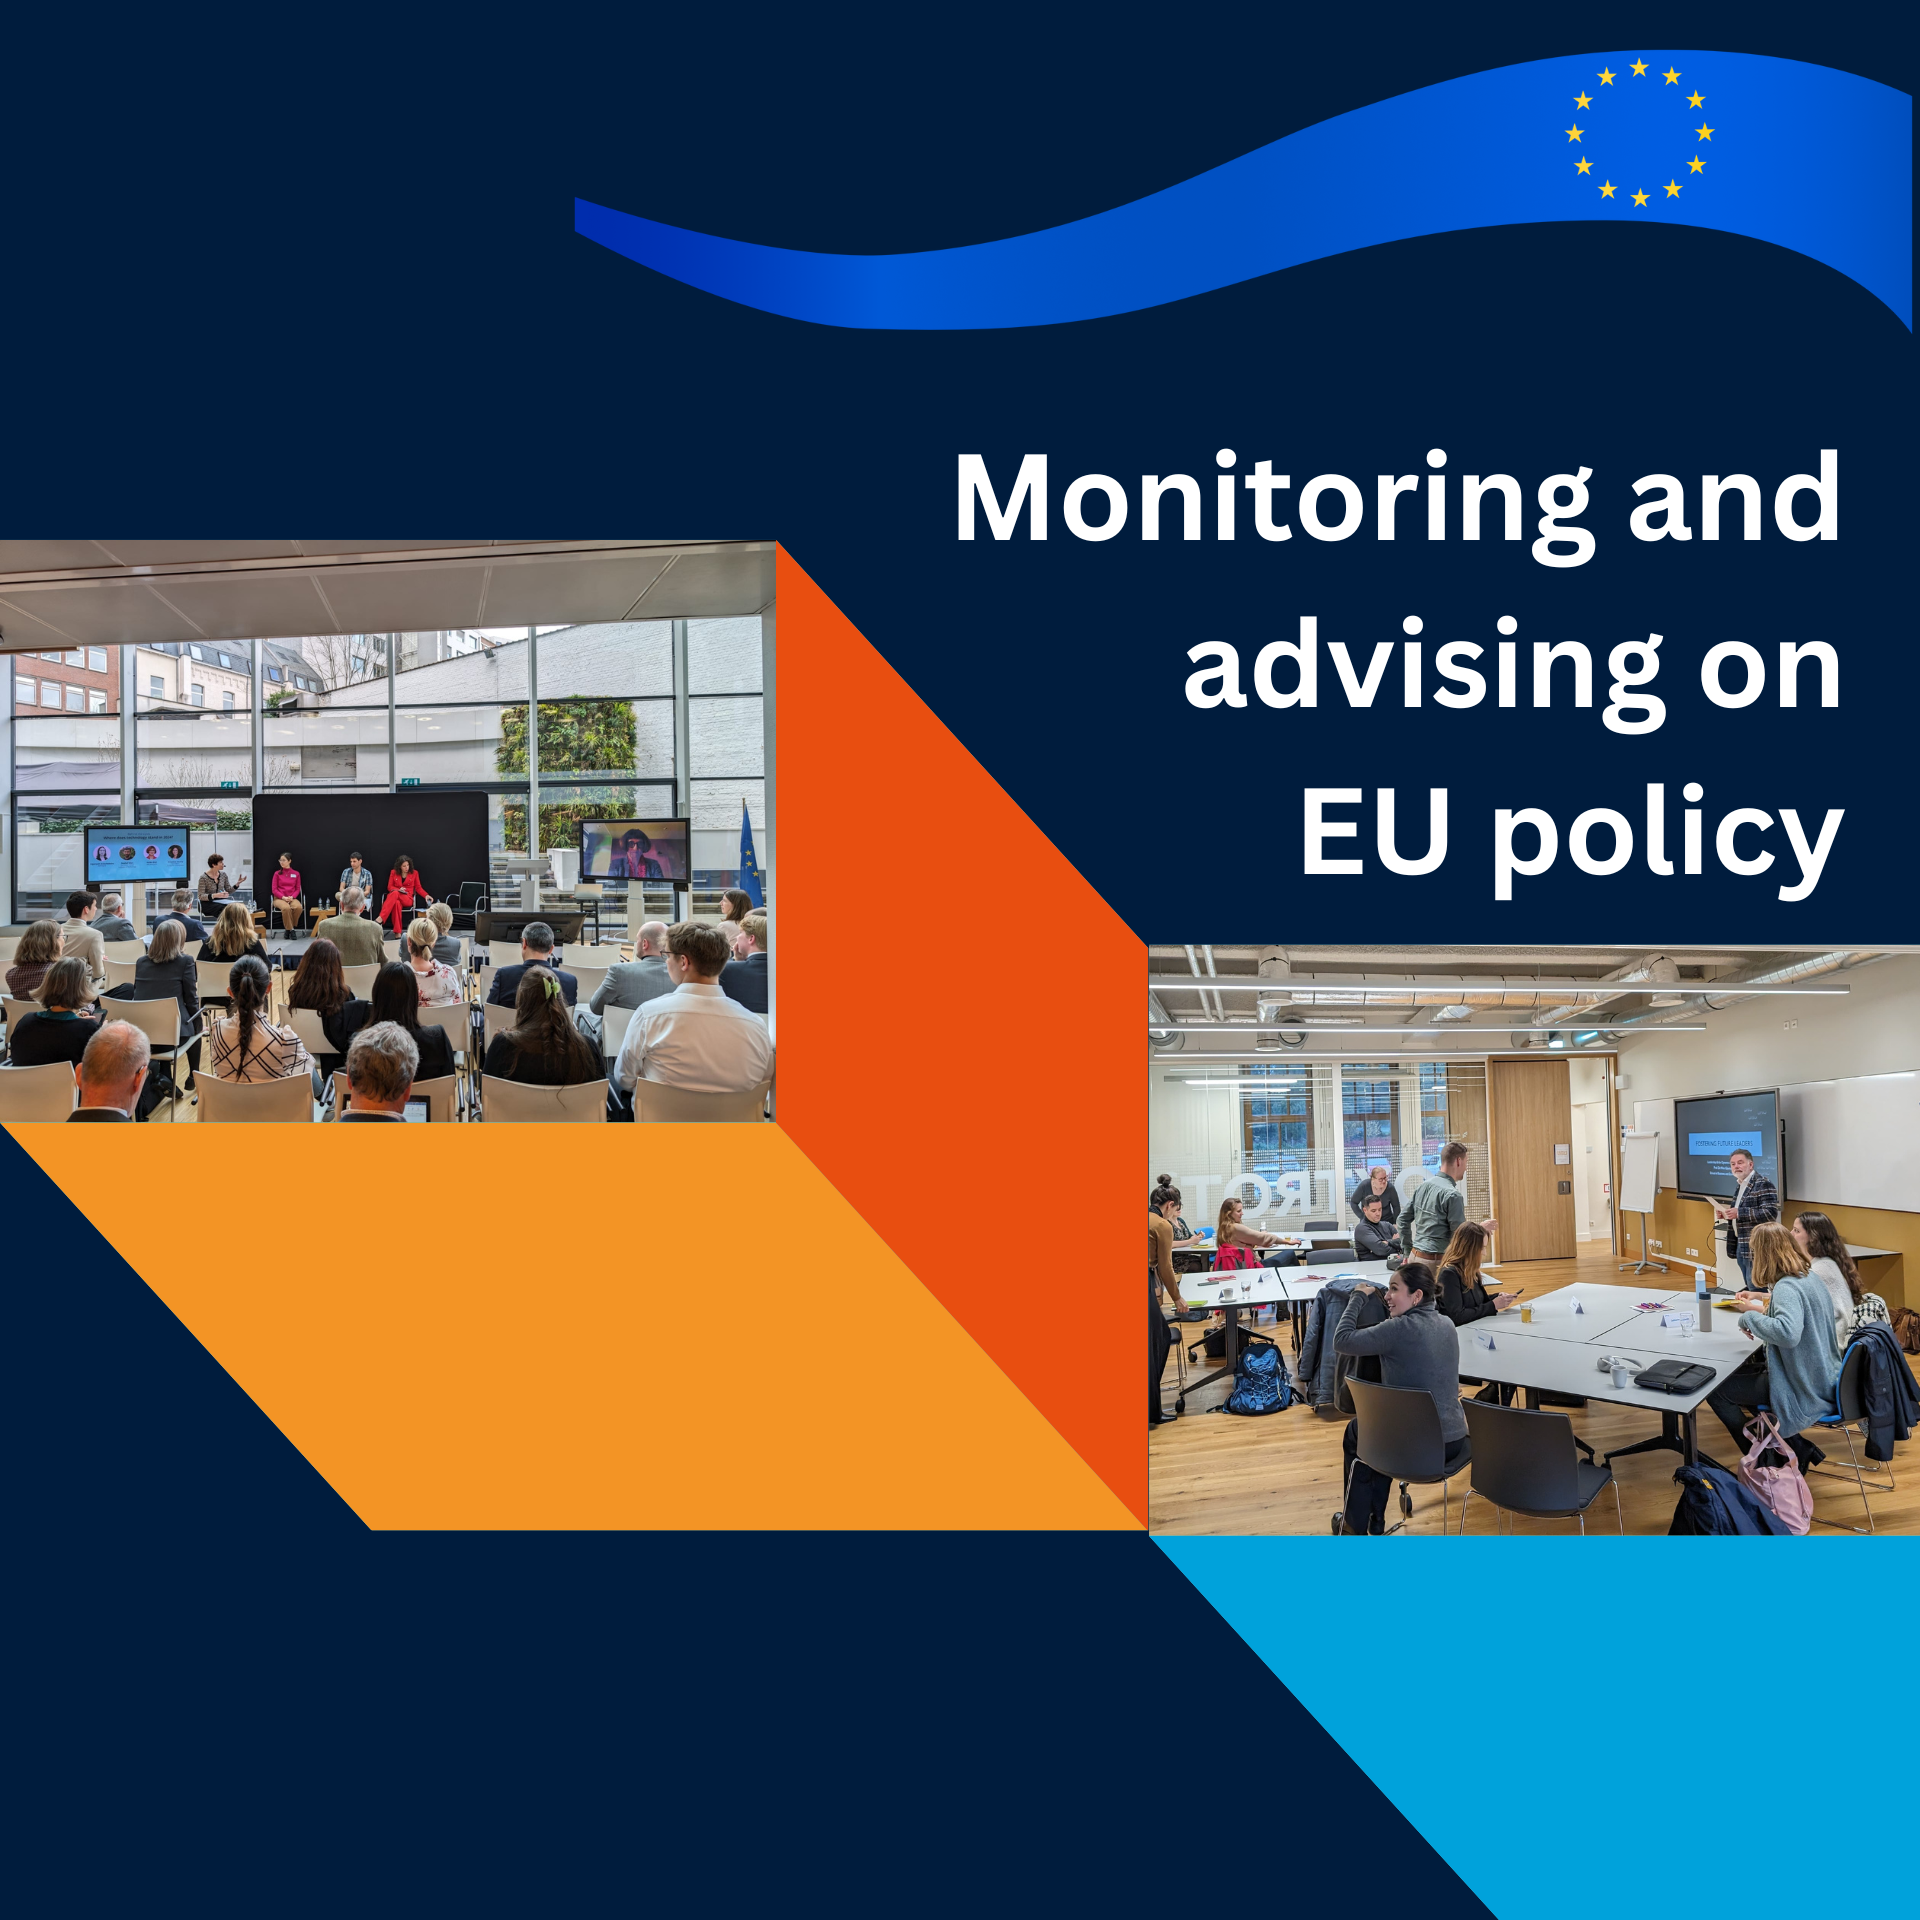 Monitoring and advising on EU policy